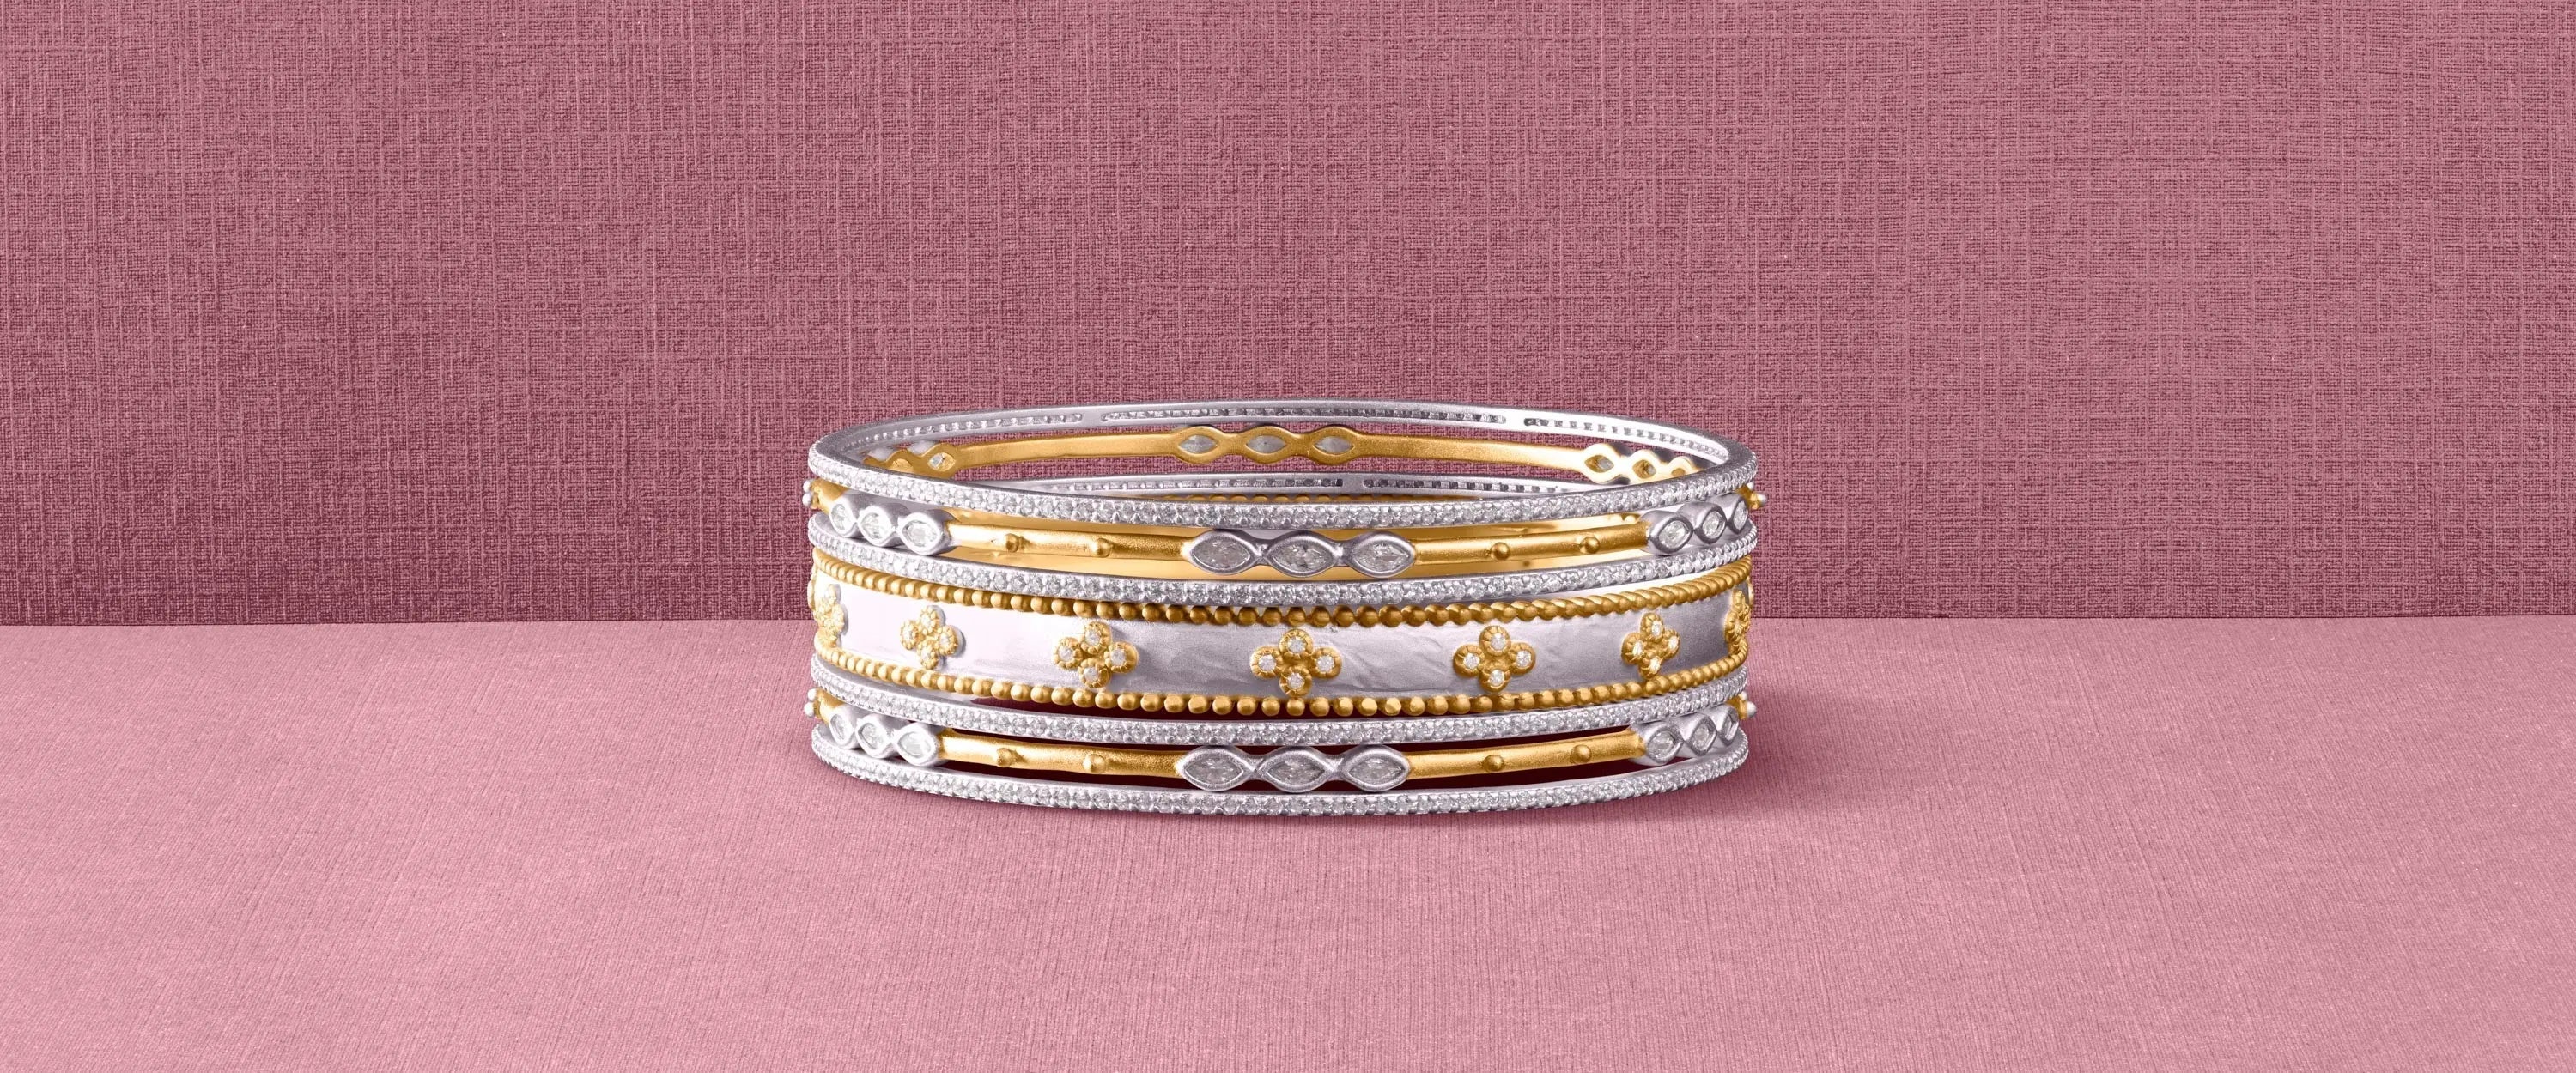 Buy discounted womens fashion jewellery online Amante 9ct Gold Solid  Engraved Rope Edge Expanding Bangle